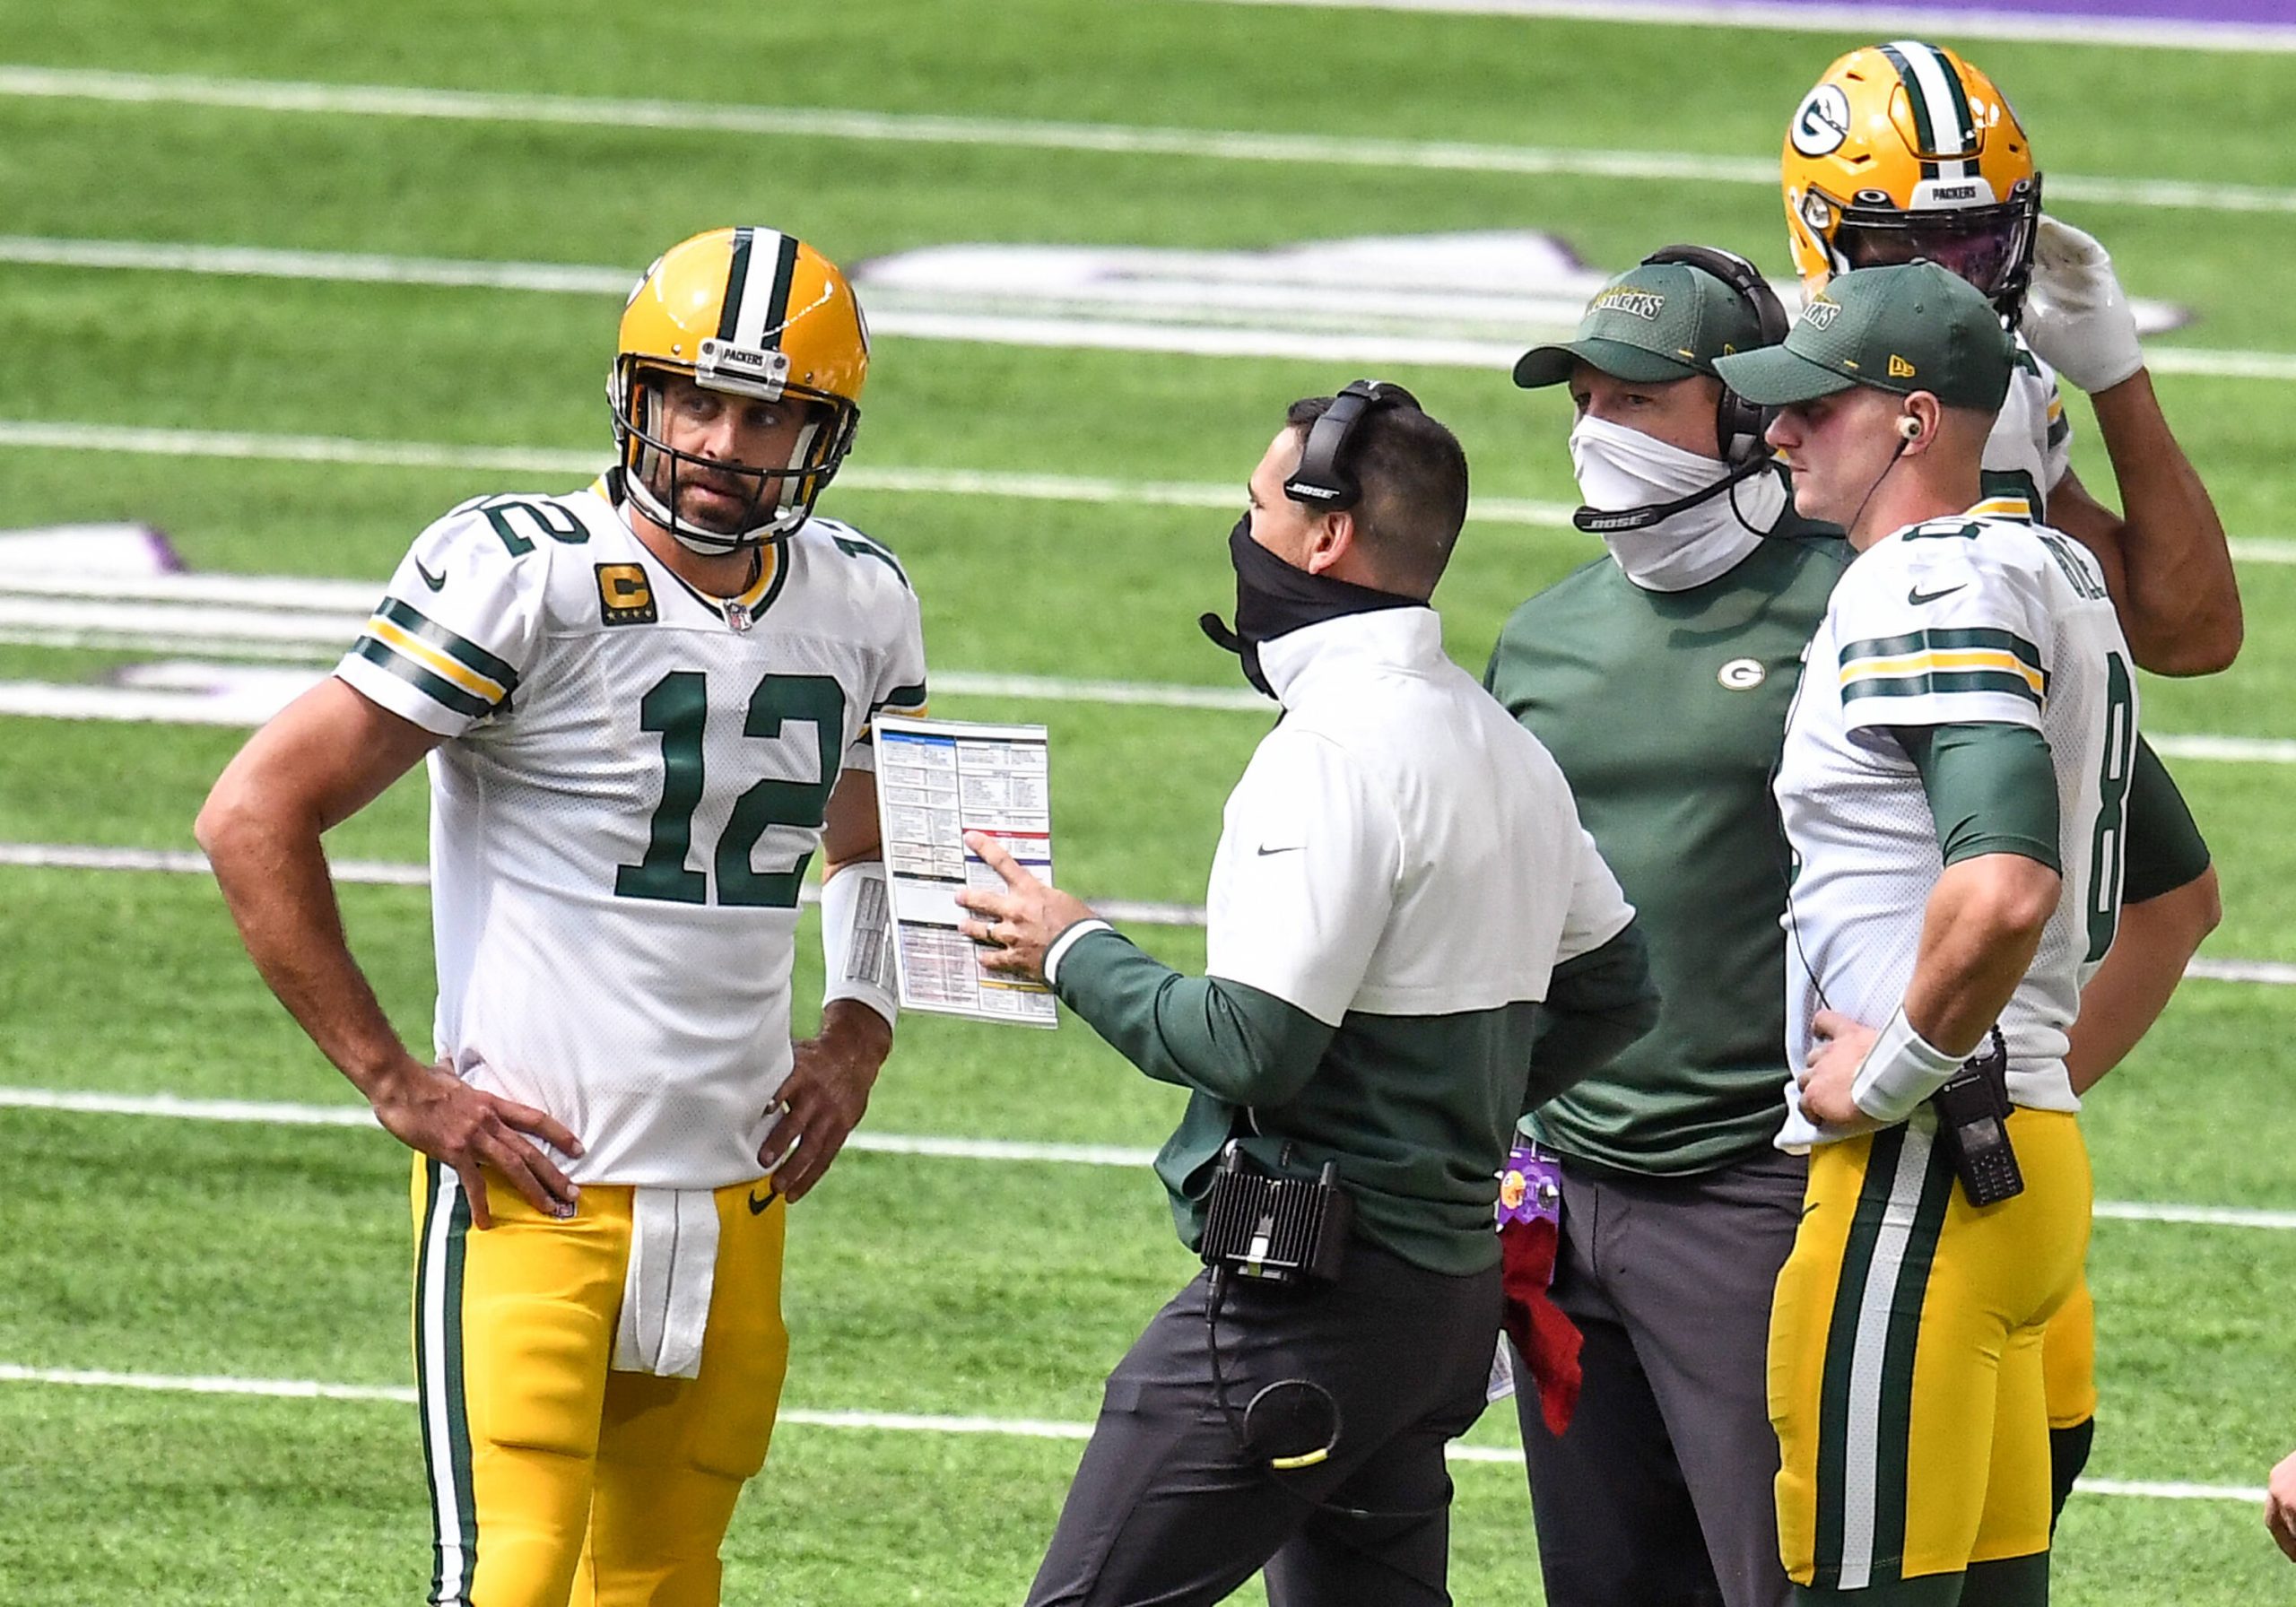 MINNEAPOLIS, MN - SEPTEMBER 13: Green Bay Packers Quarterback Aaron Rodgers (12) talks with Green Bay Packers Head Coach